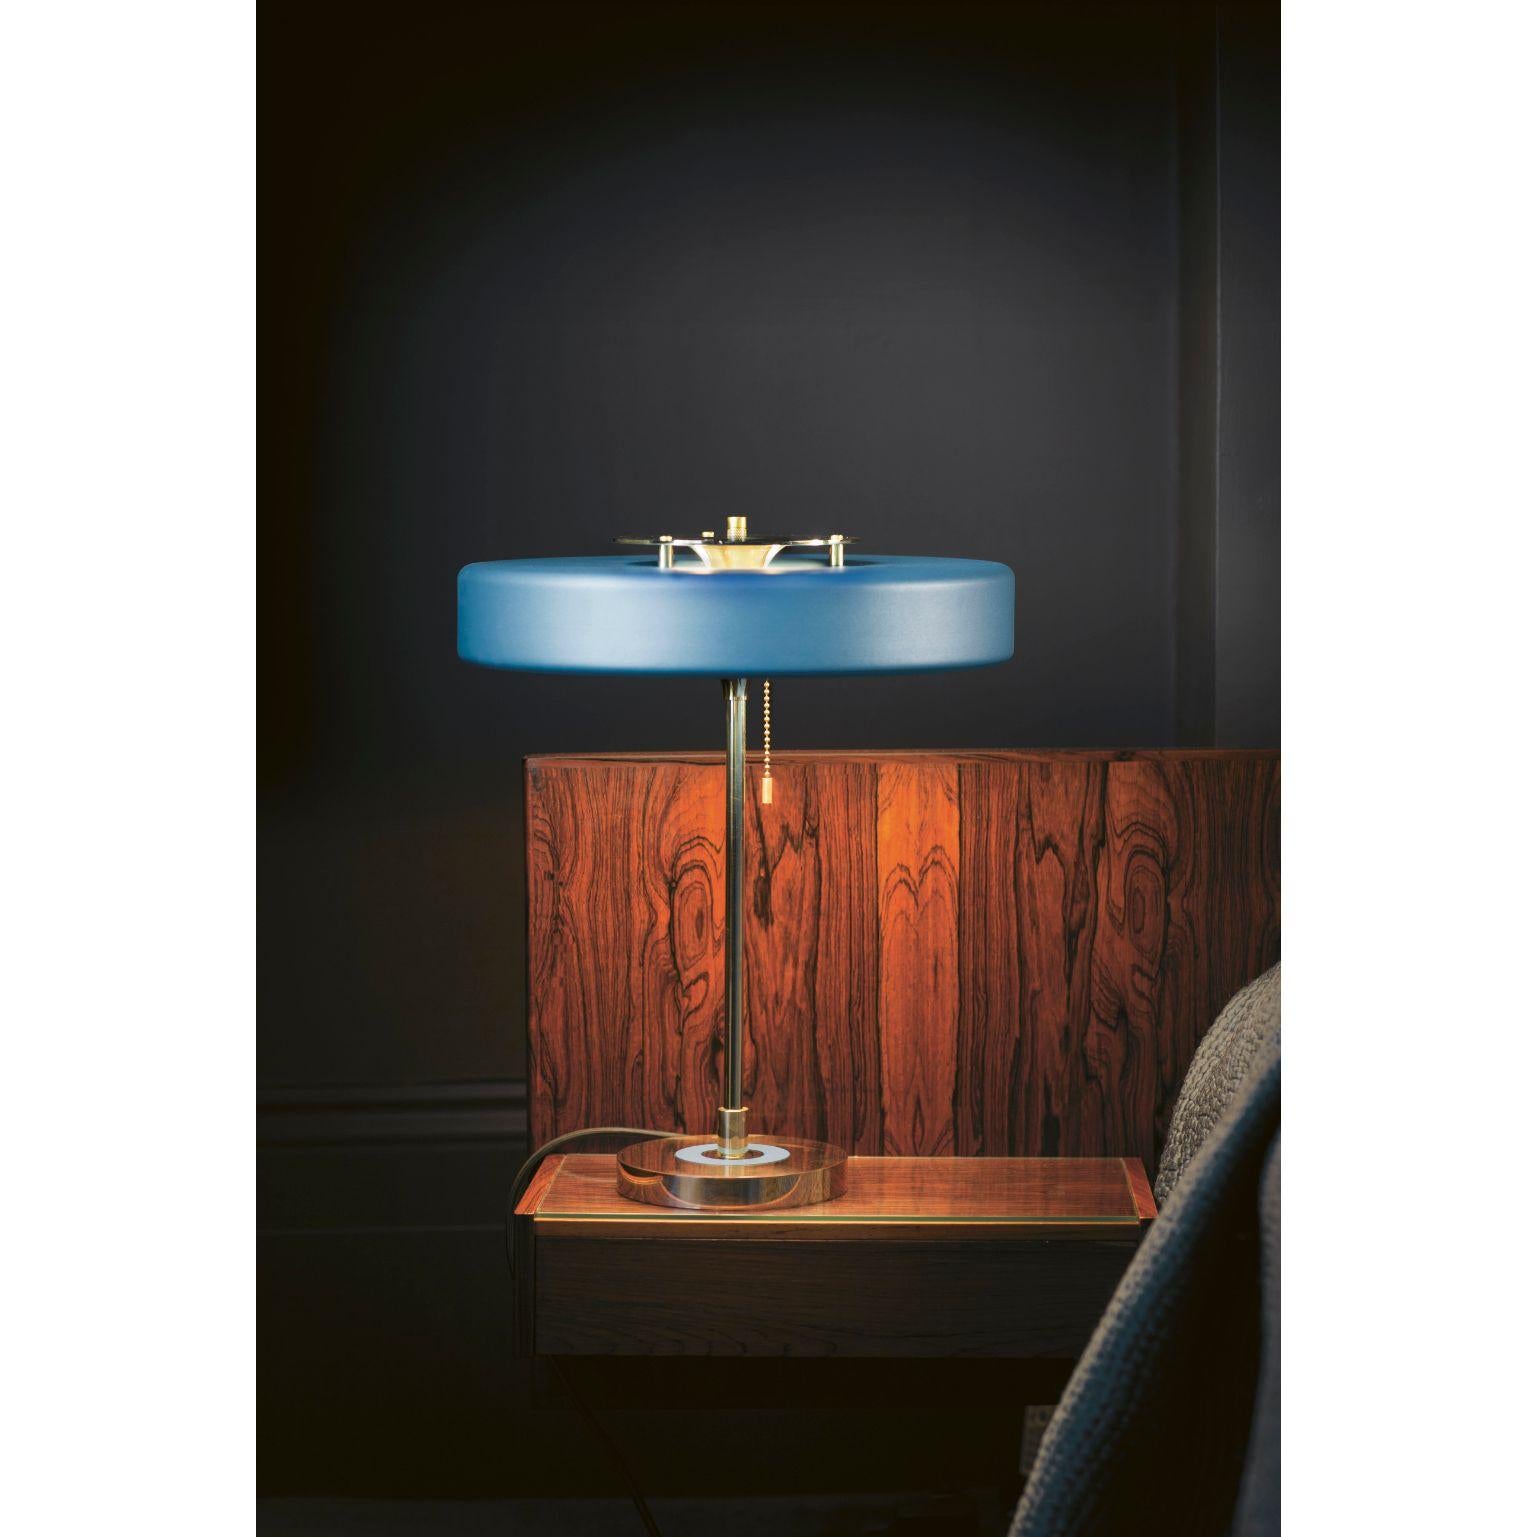 Revolve table lamp - Brushed brass - Black by Bert Frank
Dimensions: 42 x 35 x 15 cm
Materials: Brass, steel

Also Available in polished brass

When Adam Yeats and Robbie Llewellyn founded Bert Frank in 2013 it was a meeting of minds and the start